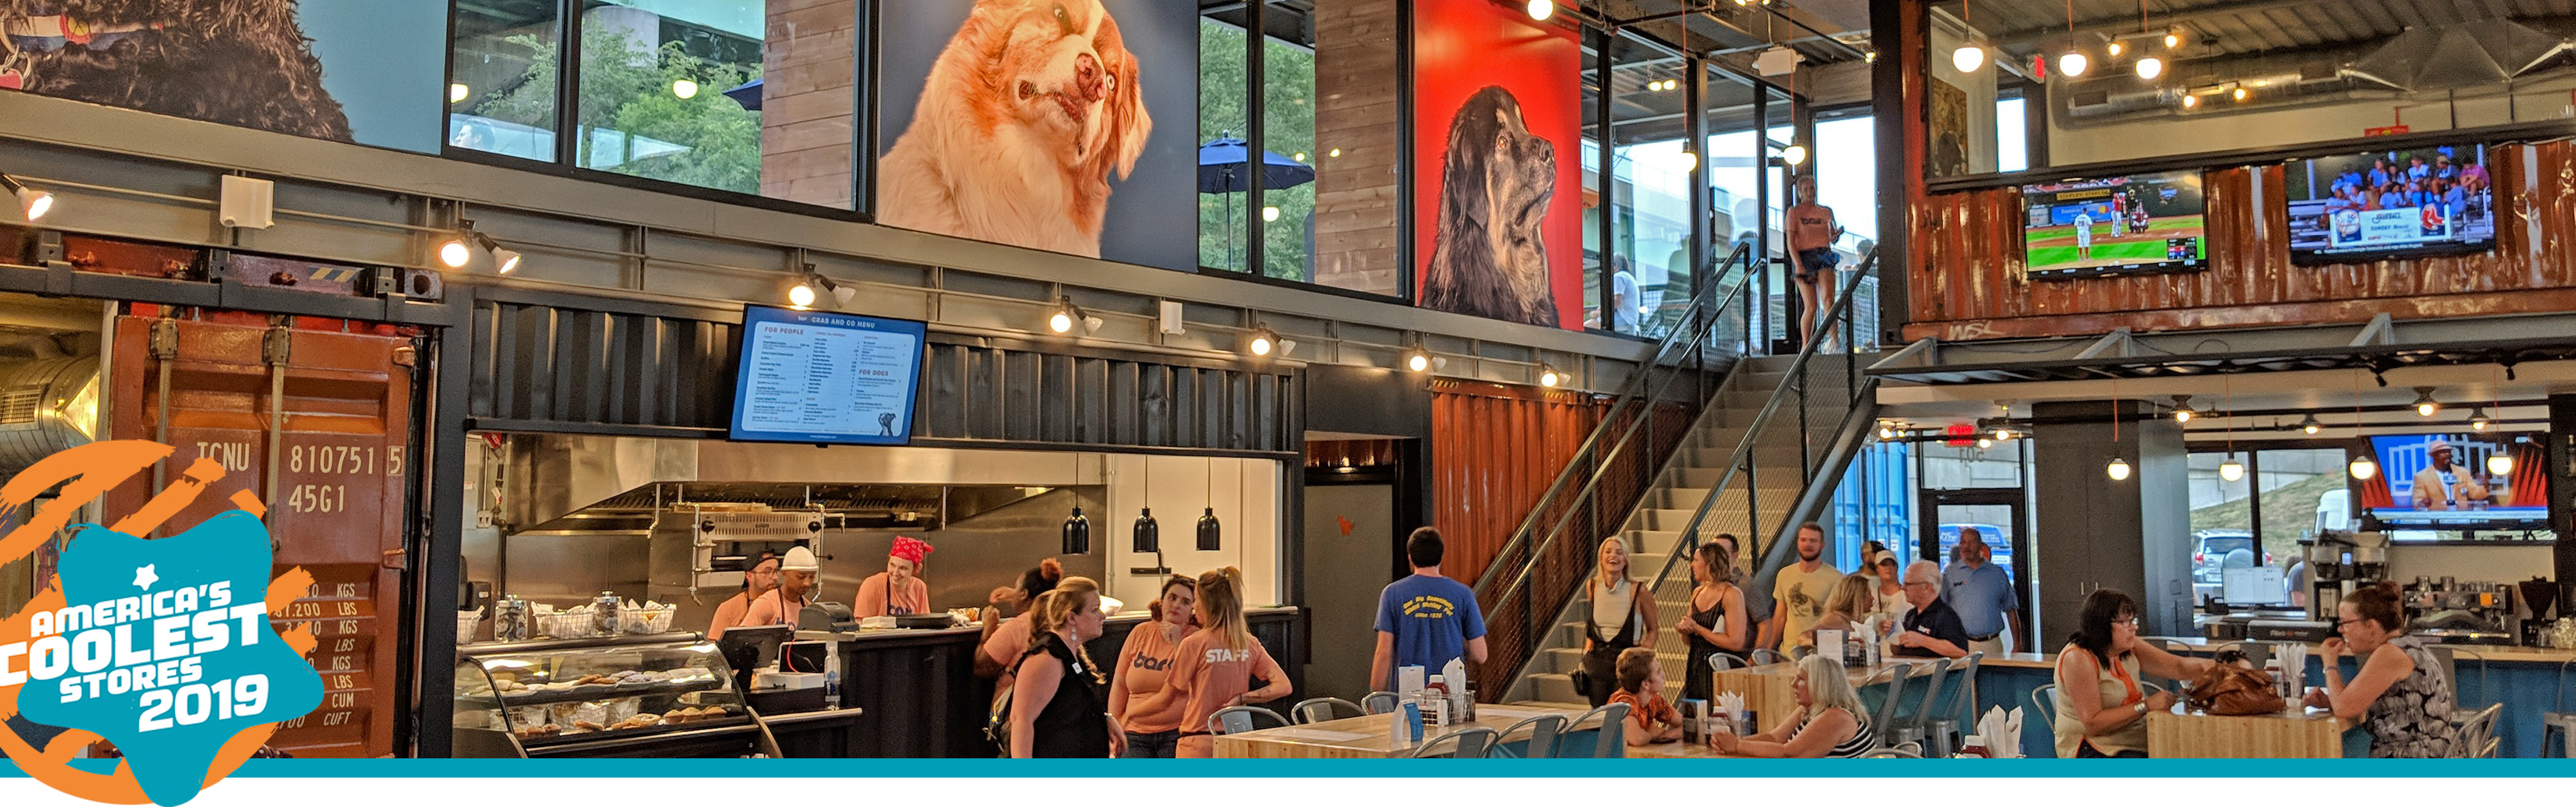 Bar K Presents Dogs And Their Humans A Business Model Like No Other Petsplusmag Com